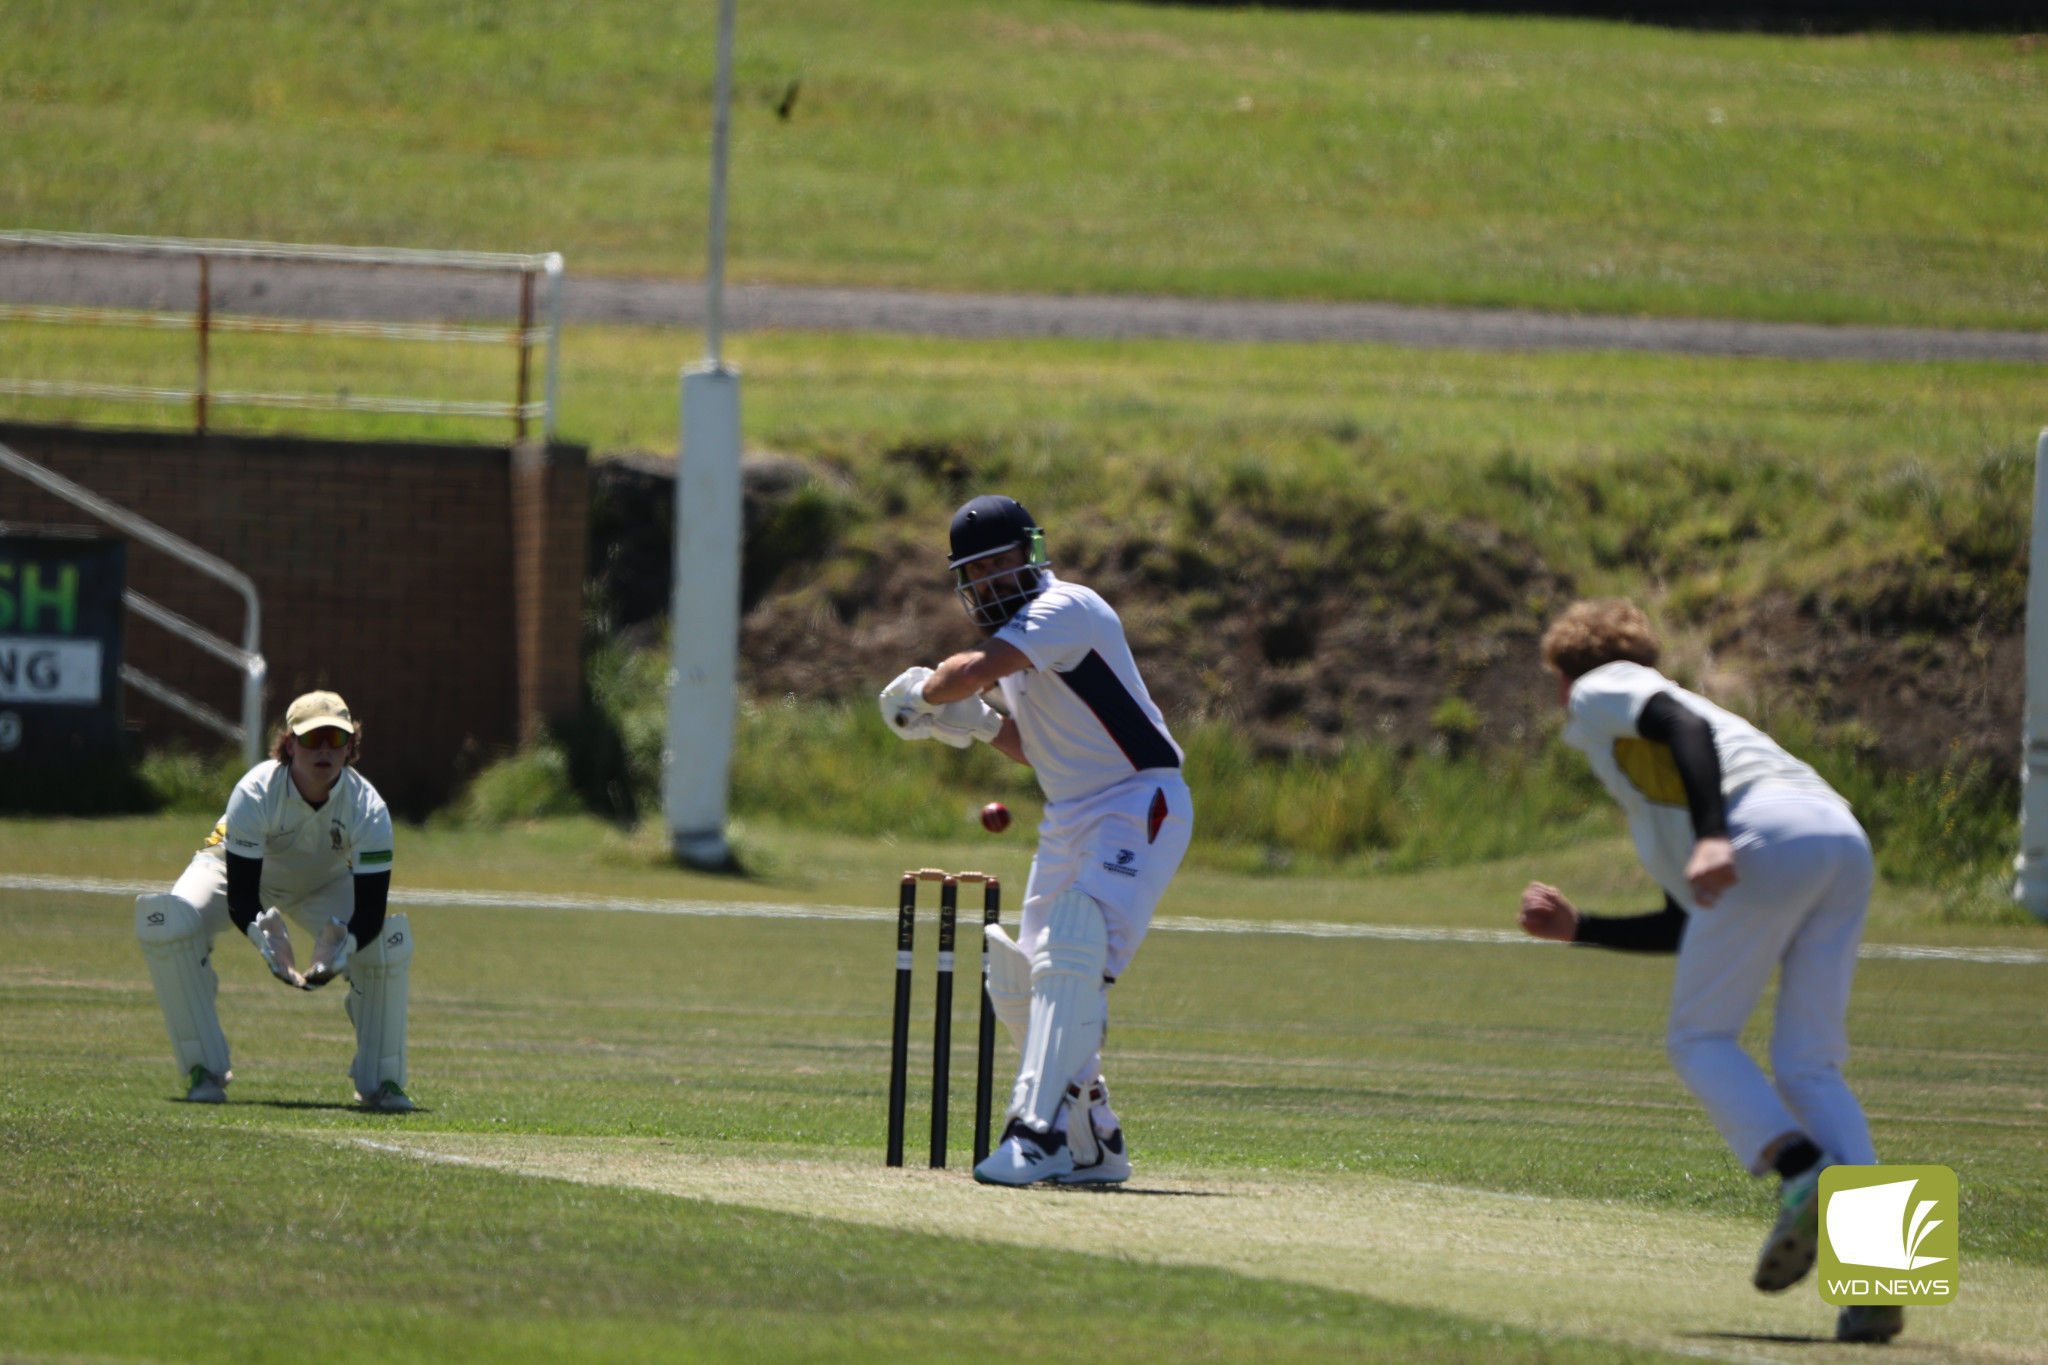 Local Cricket Action - feature photo